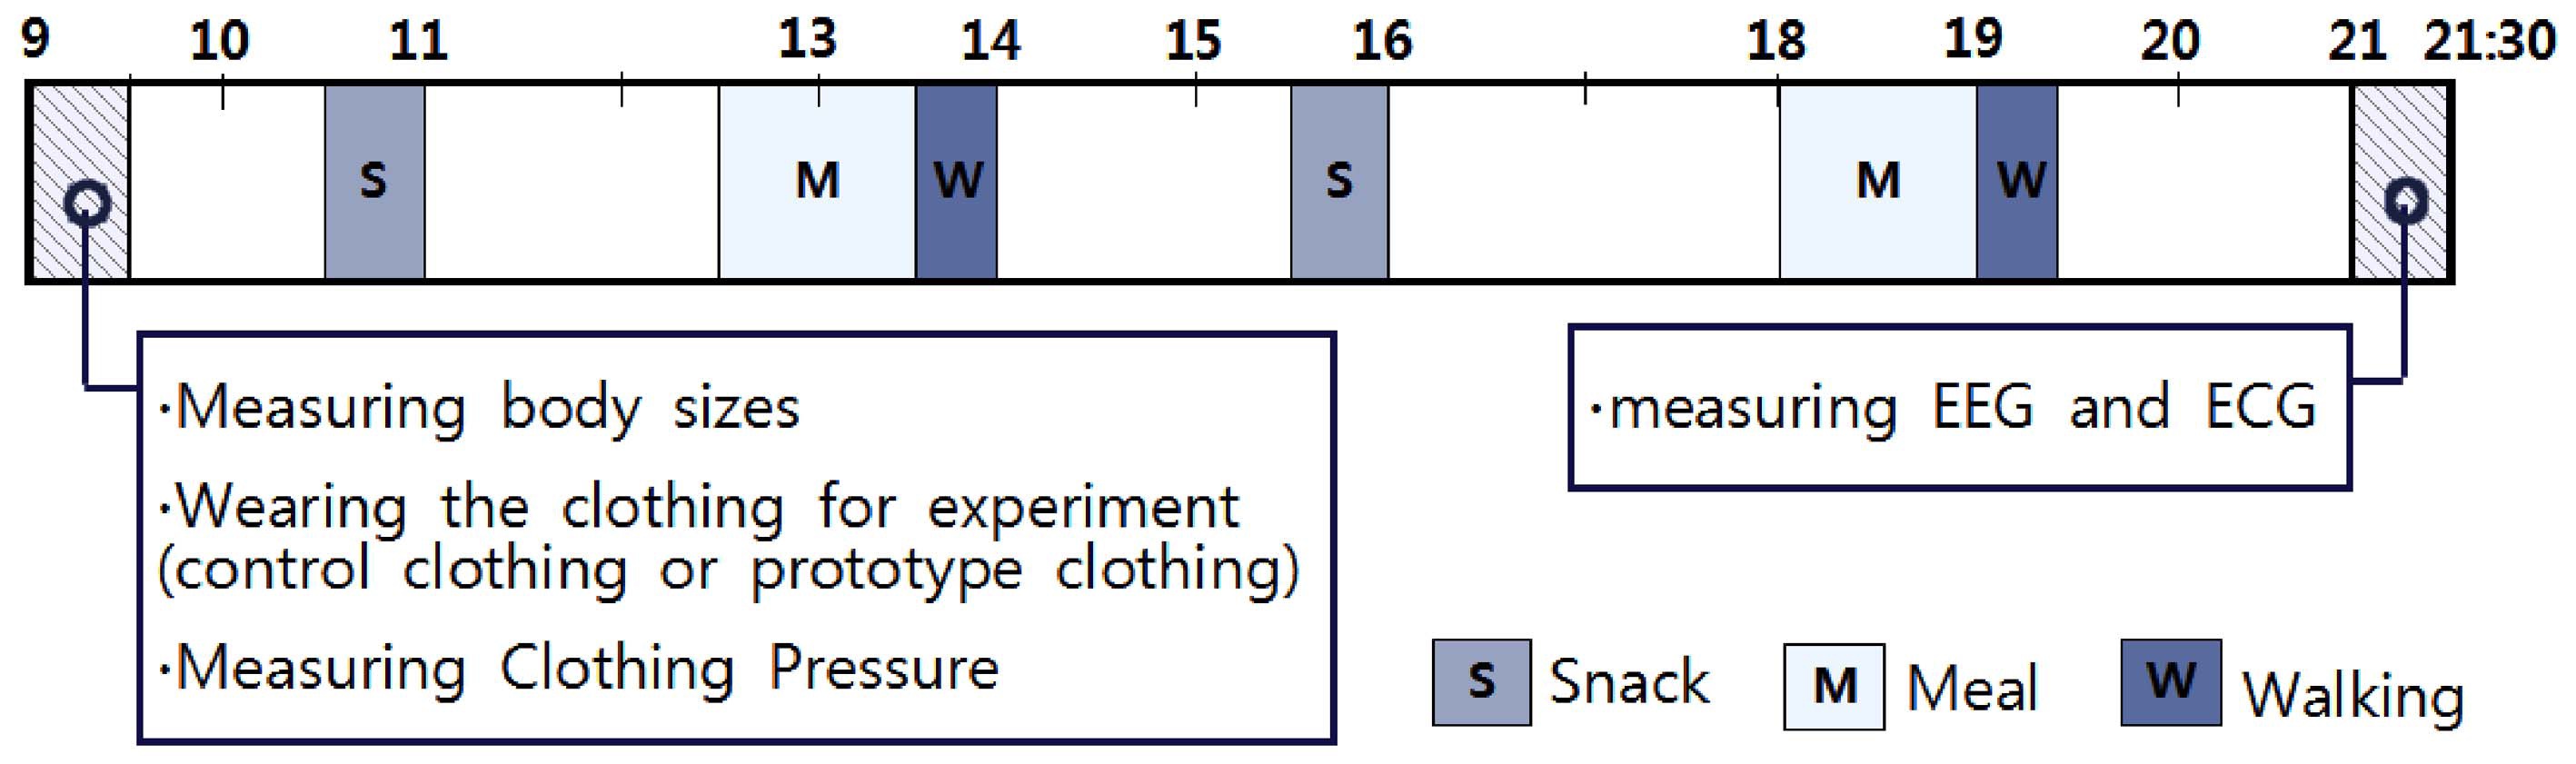 A chart of experimental schedule.